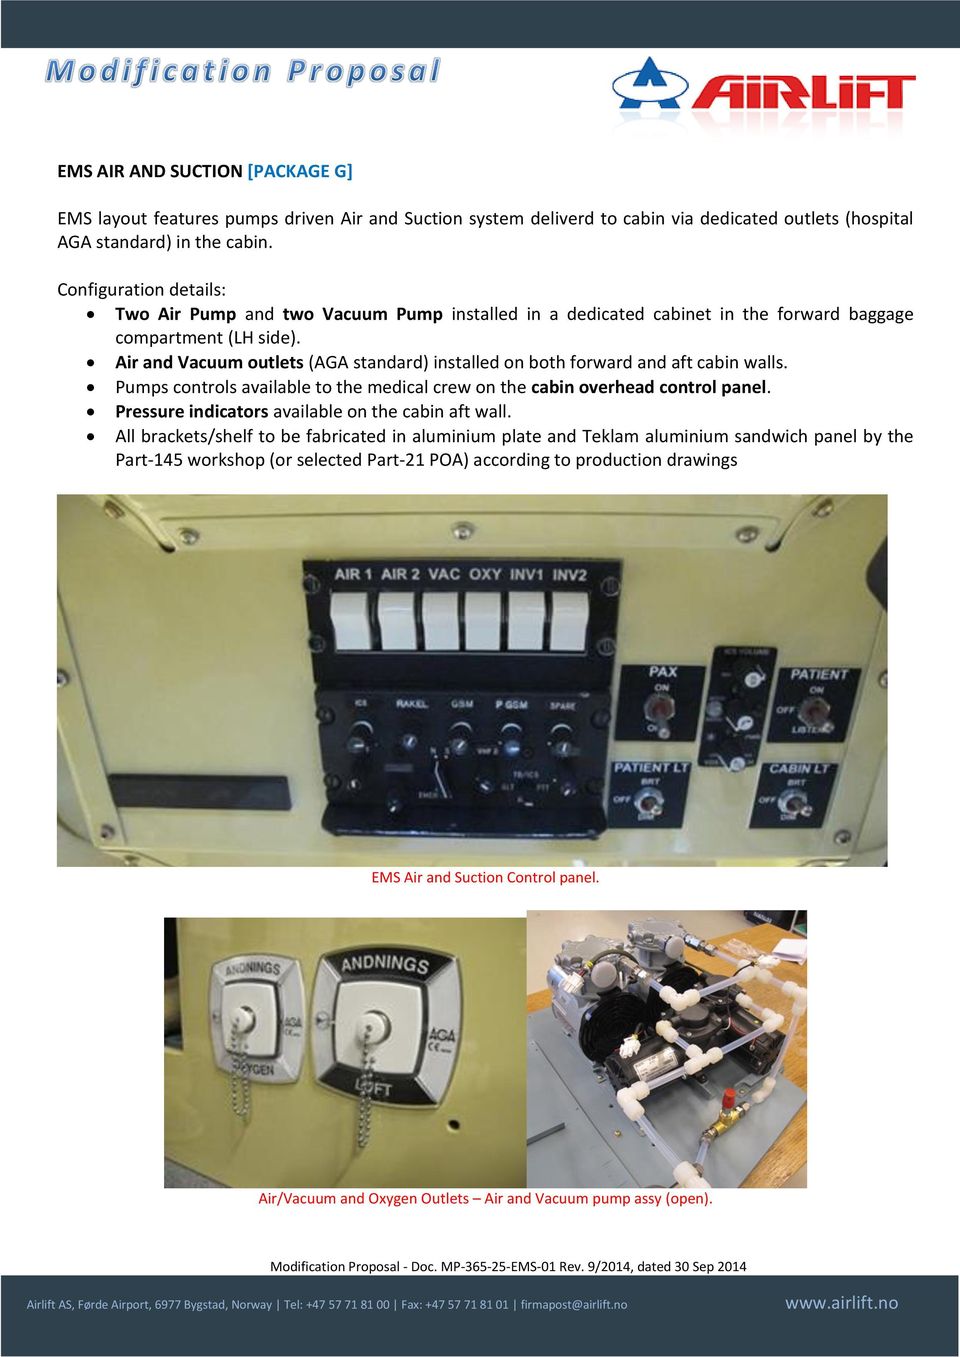 Air and Vacuum outlets (AGA standard) installed on both forward and aft cabin walls. Pumps controls available to the medical crew on the cabin overhead control panel.